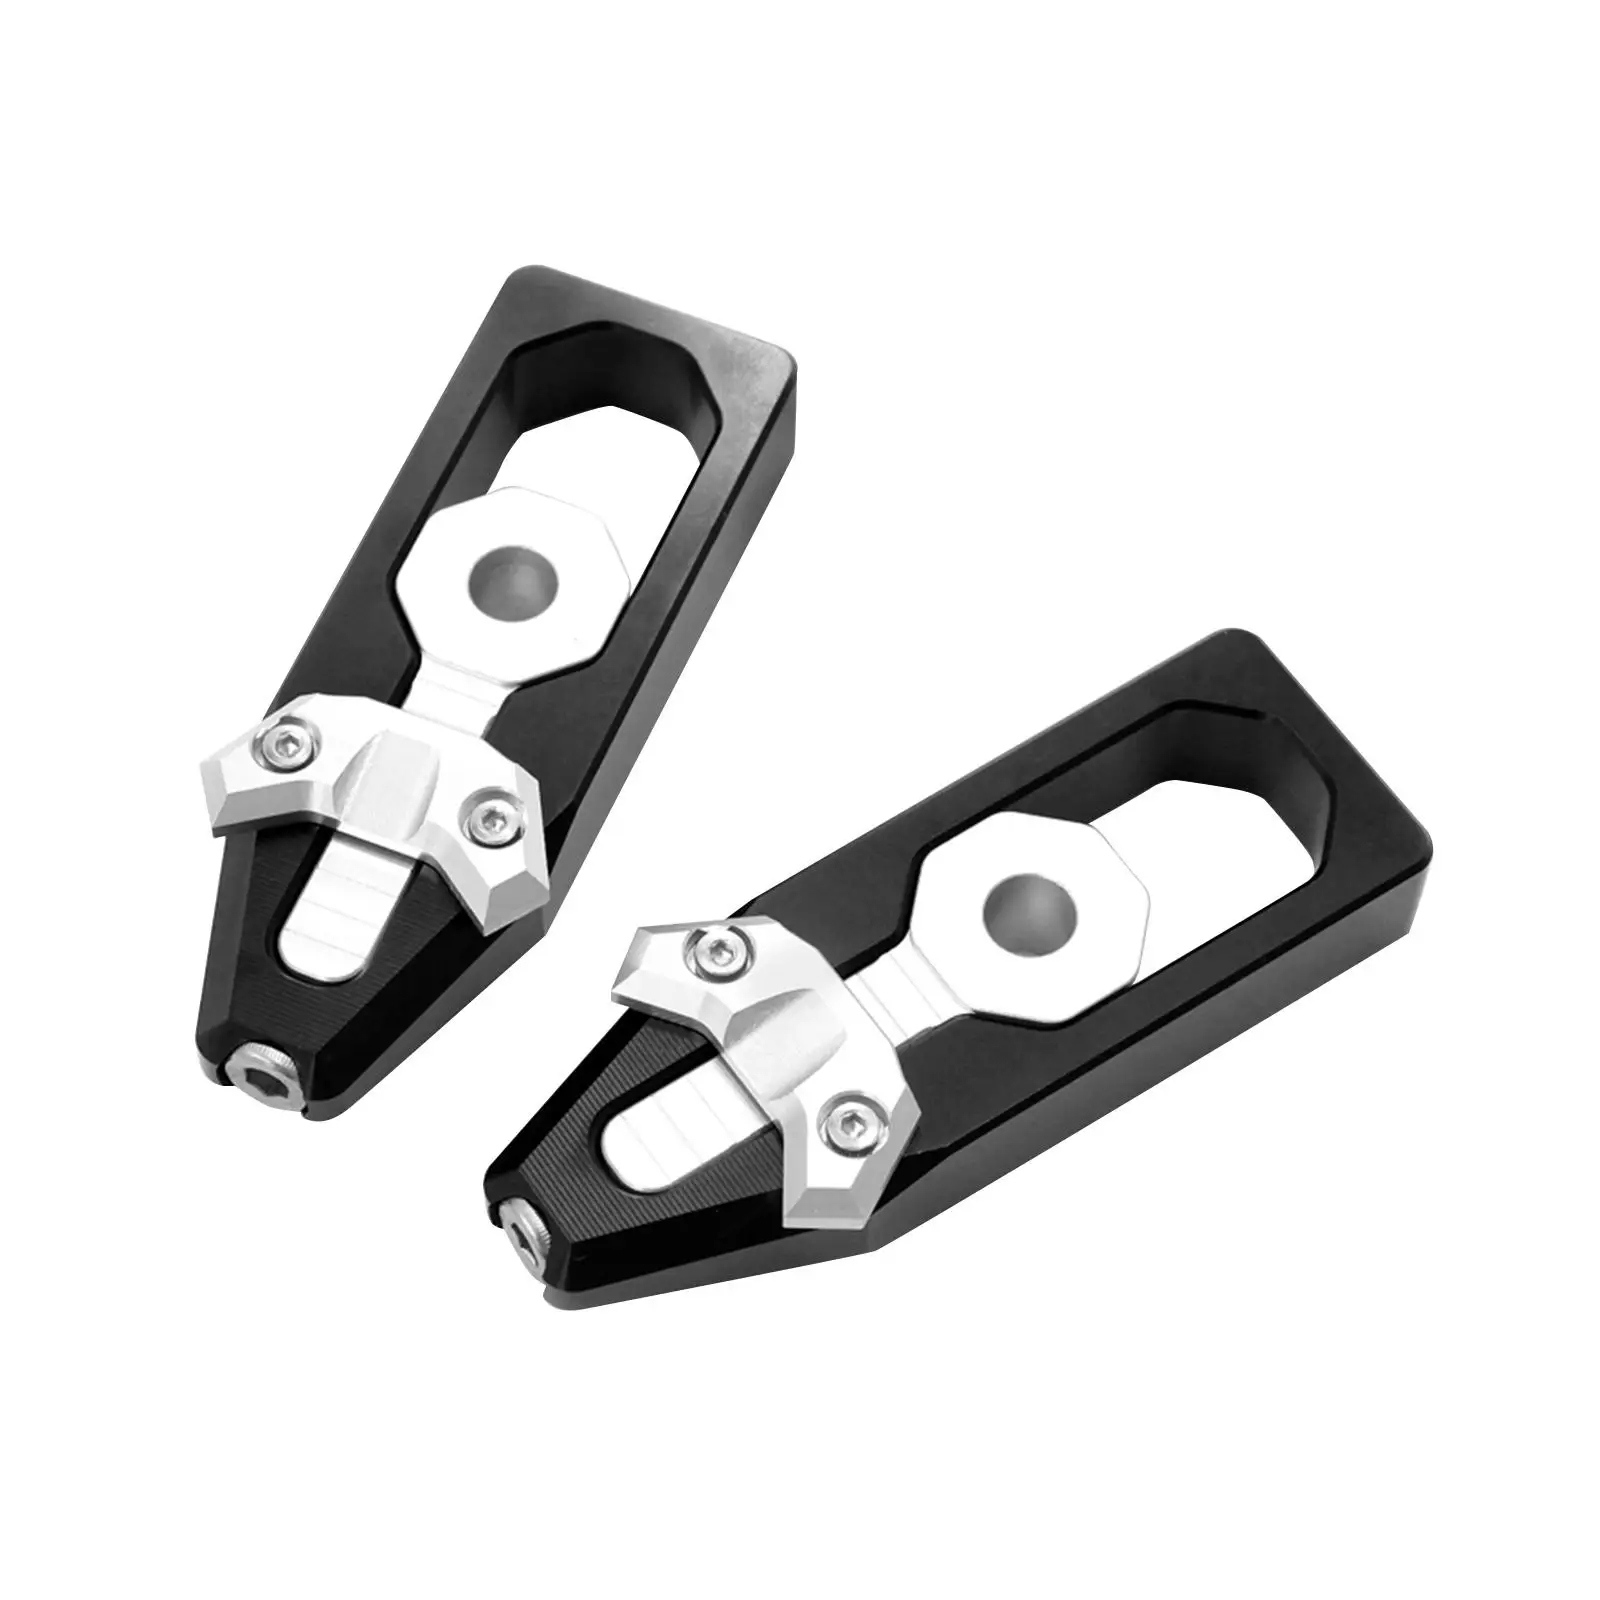 2 Pieces Motorcycle Chain Adjusting Tool Multifunction Chain Adjuster Chain